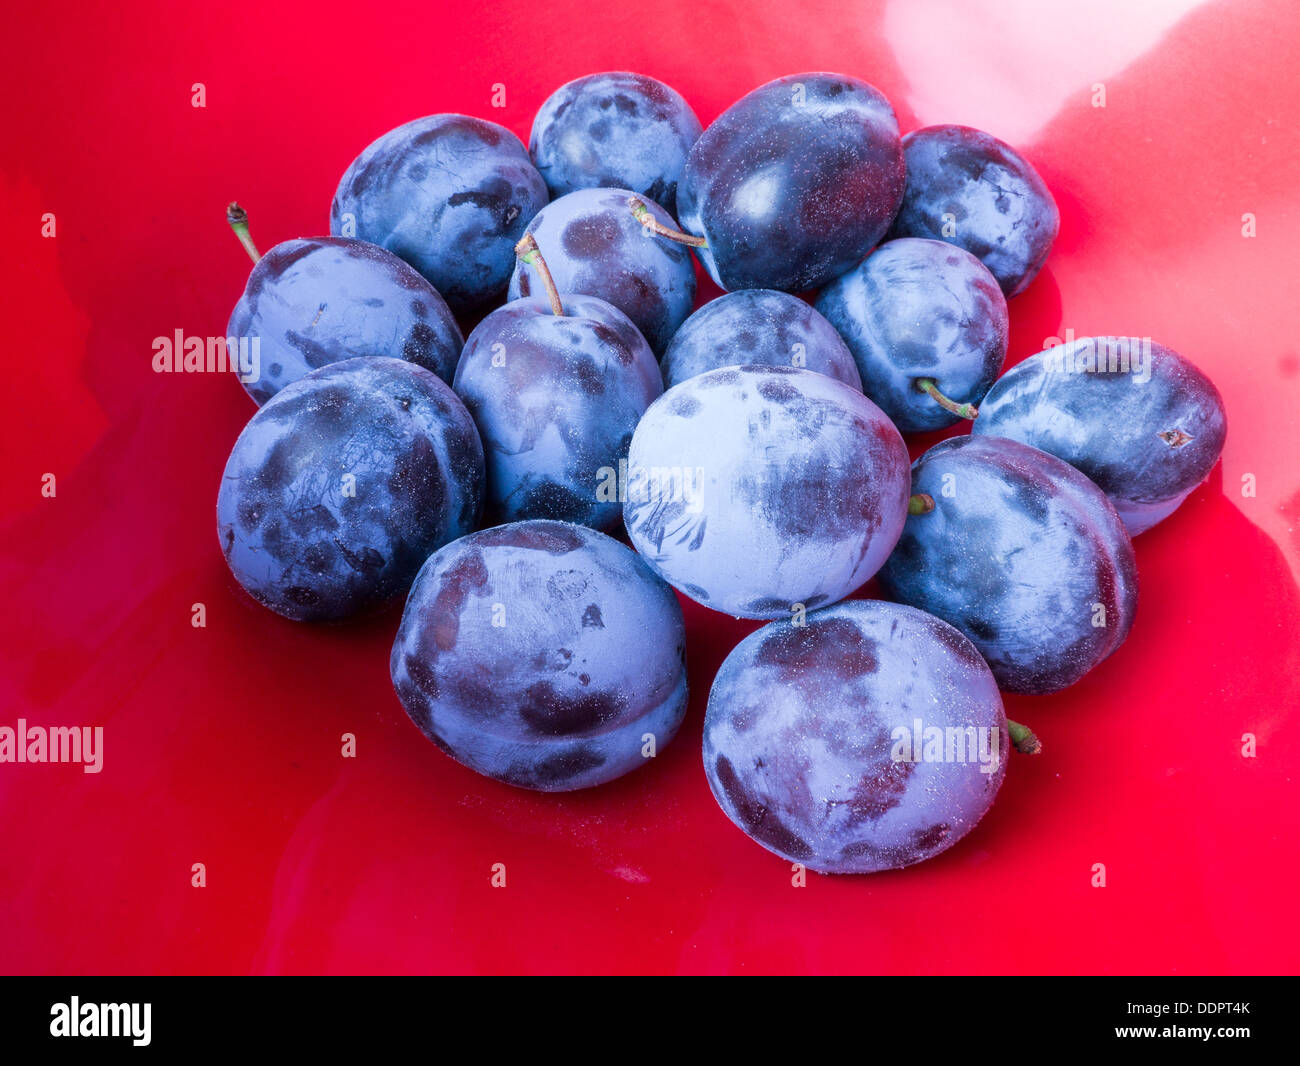 Fresh purple plums in a red bowl Stock Photo